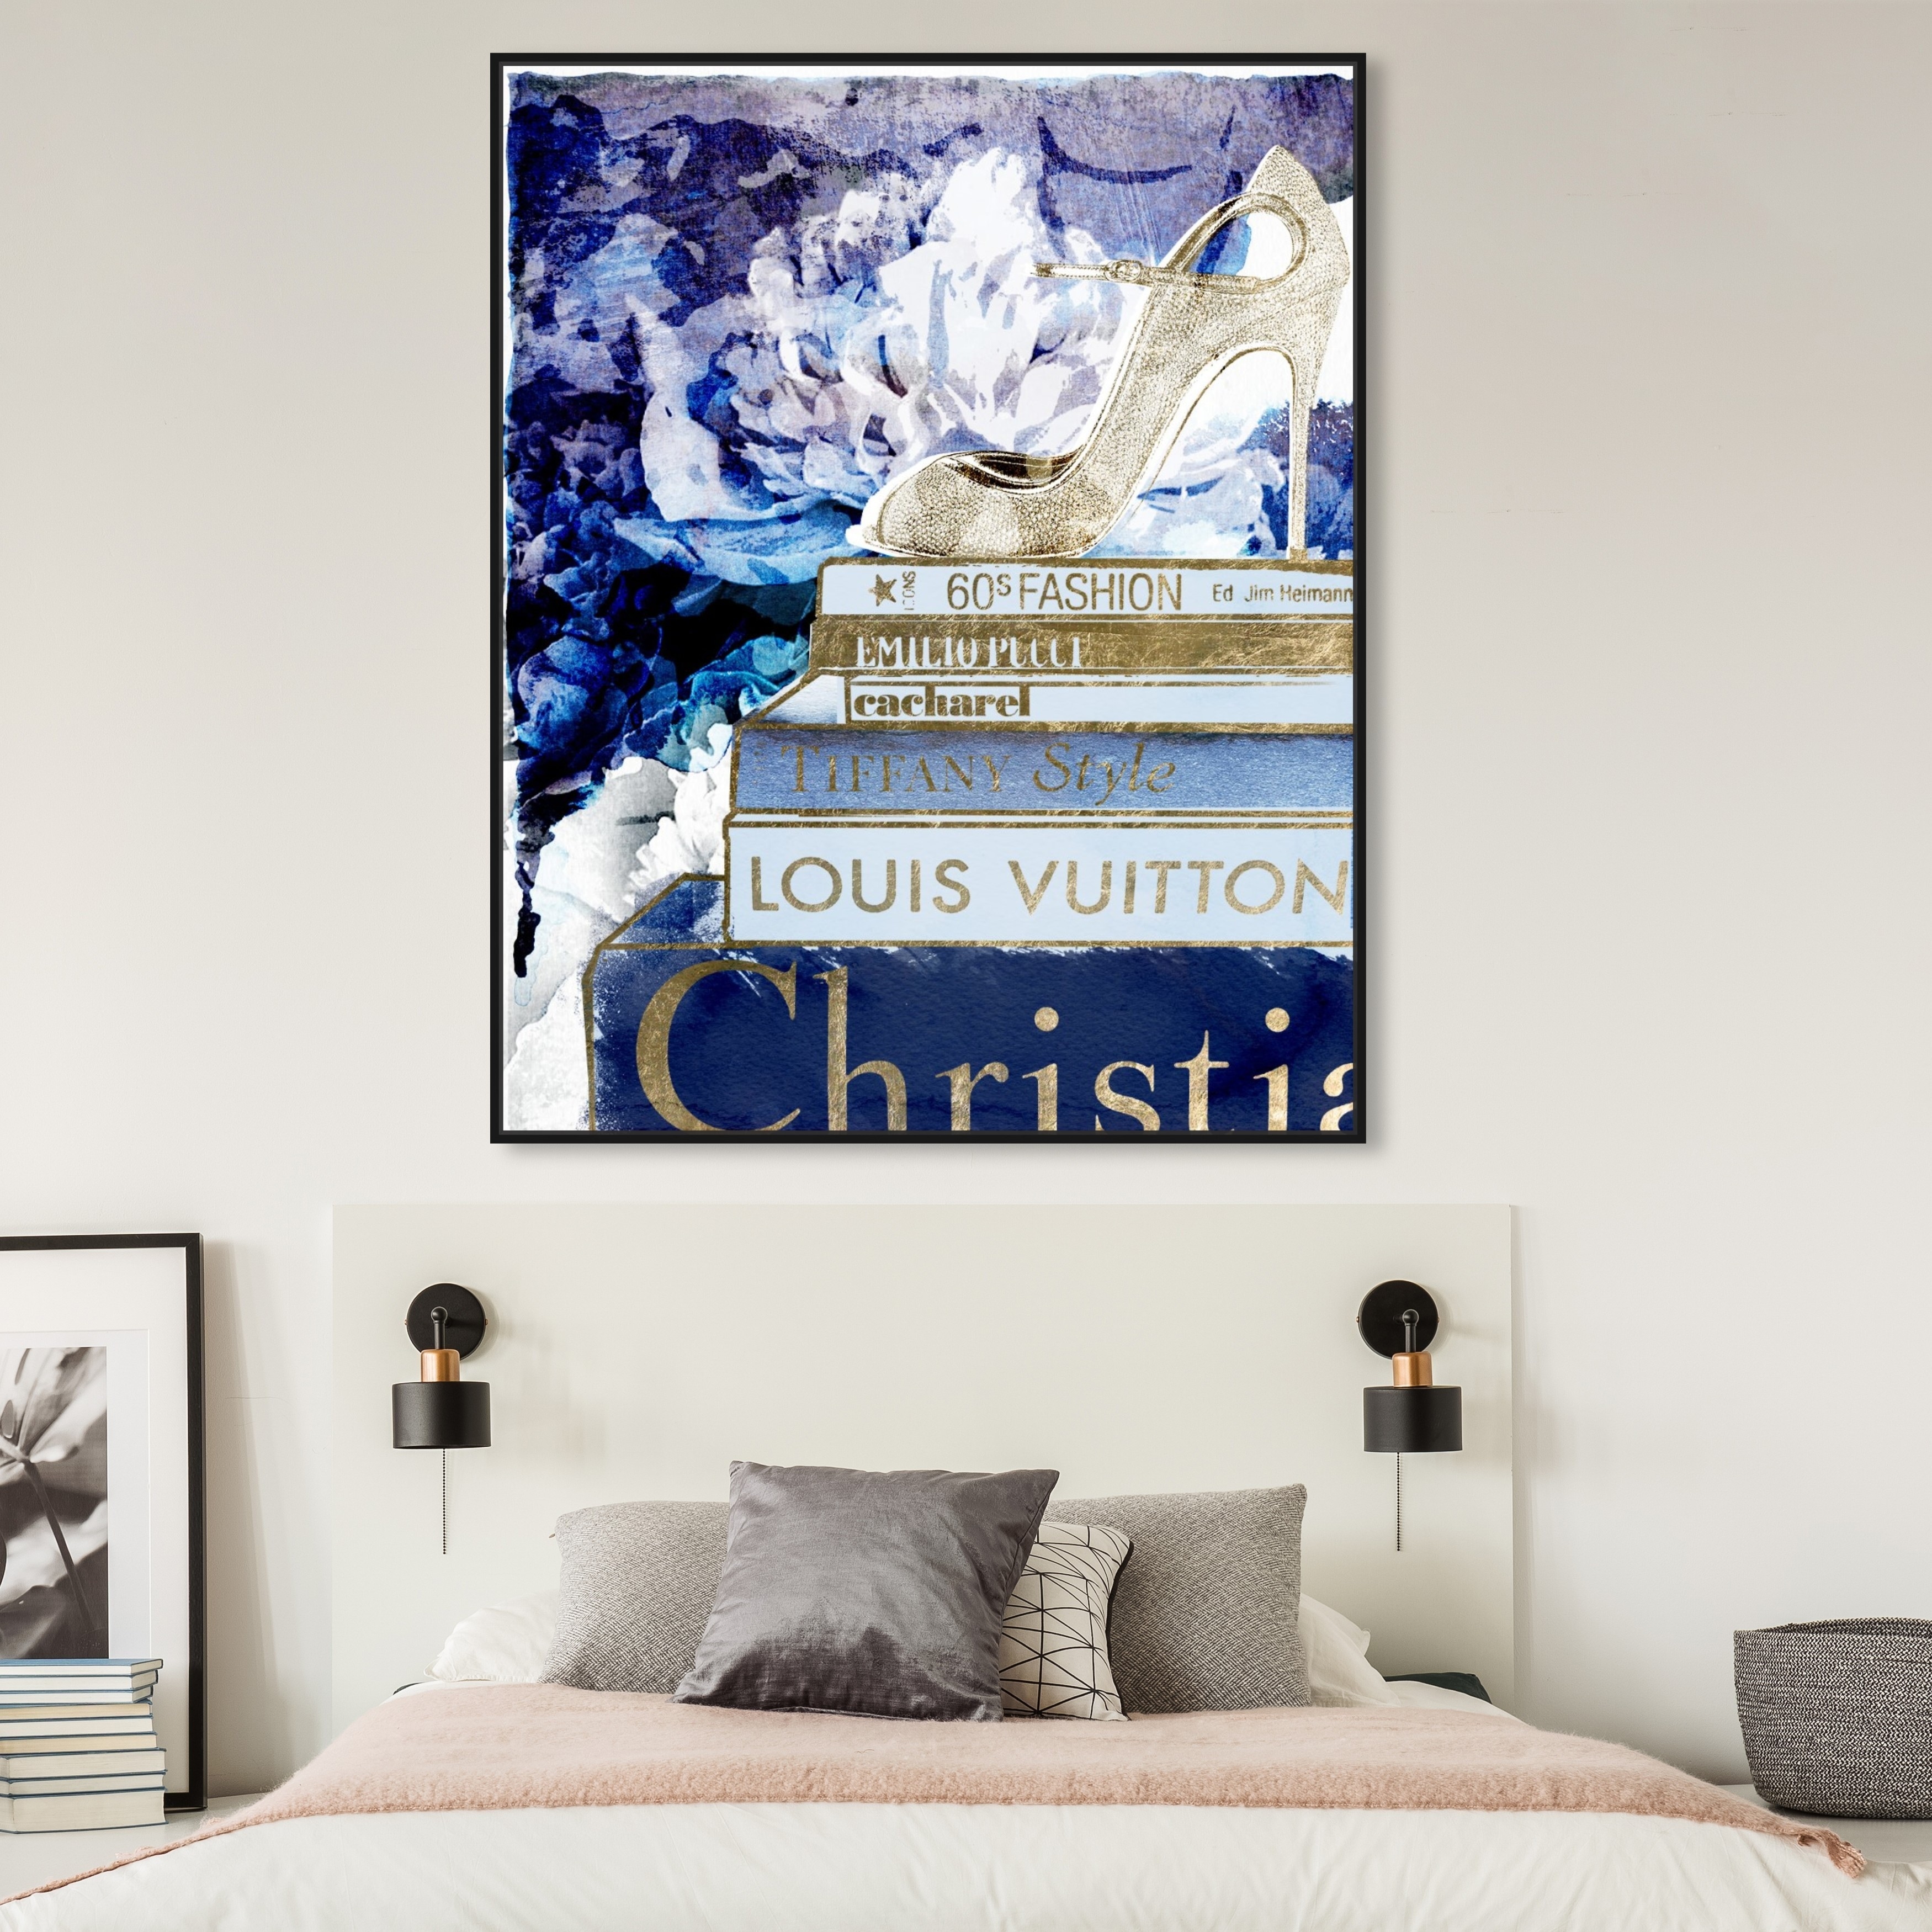 Oliver Gal 'What's On Your Mind Navy' Fashion and Glam Wall Art